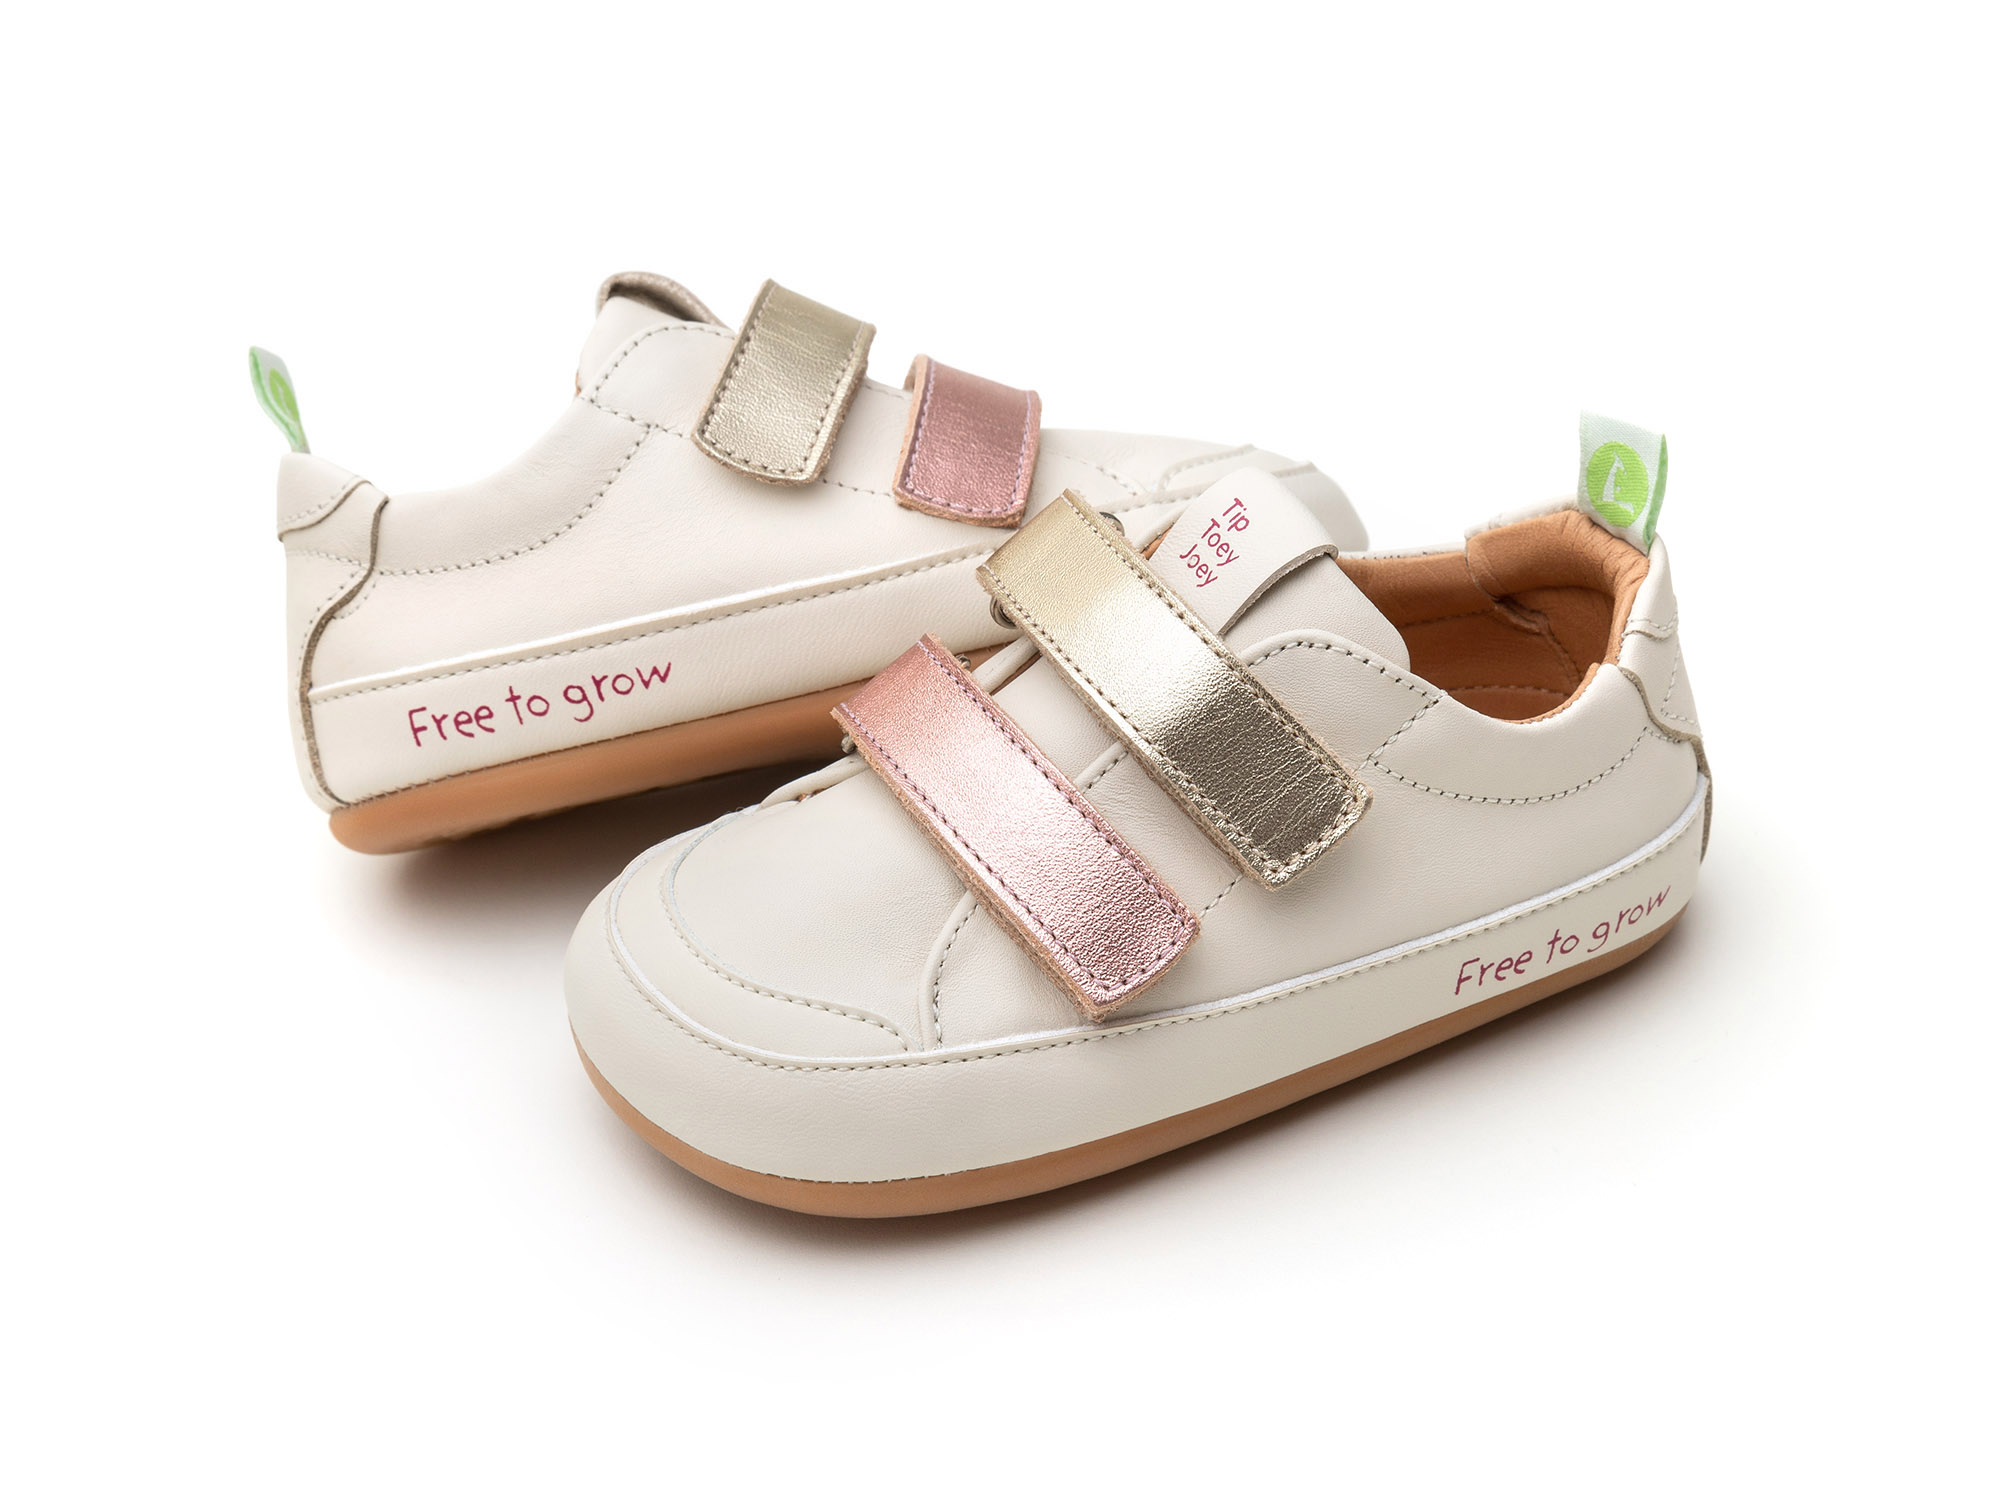 UP & GO Sneakers for Girls Bossy Play | Tip Toey Joey - Australia - 5